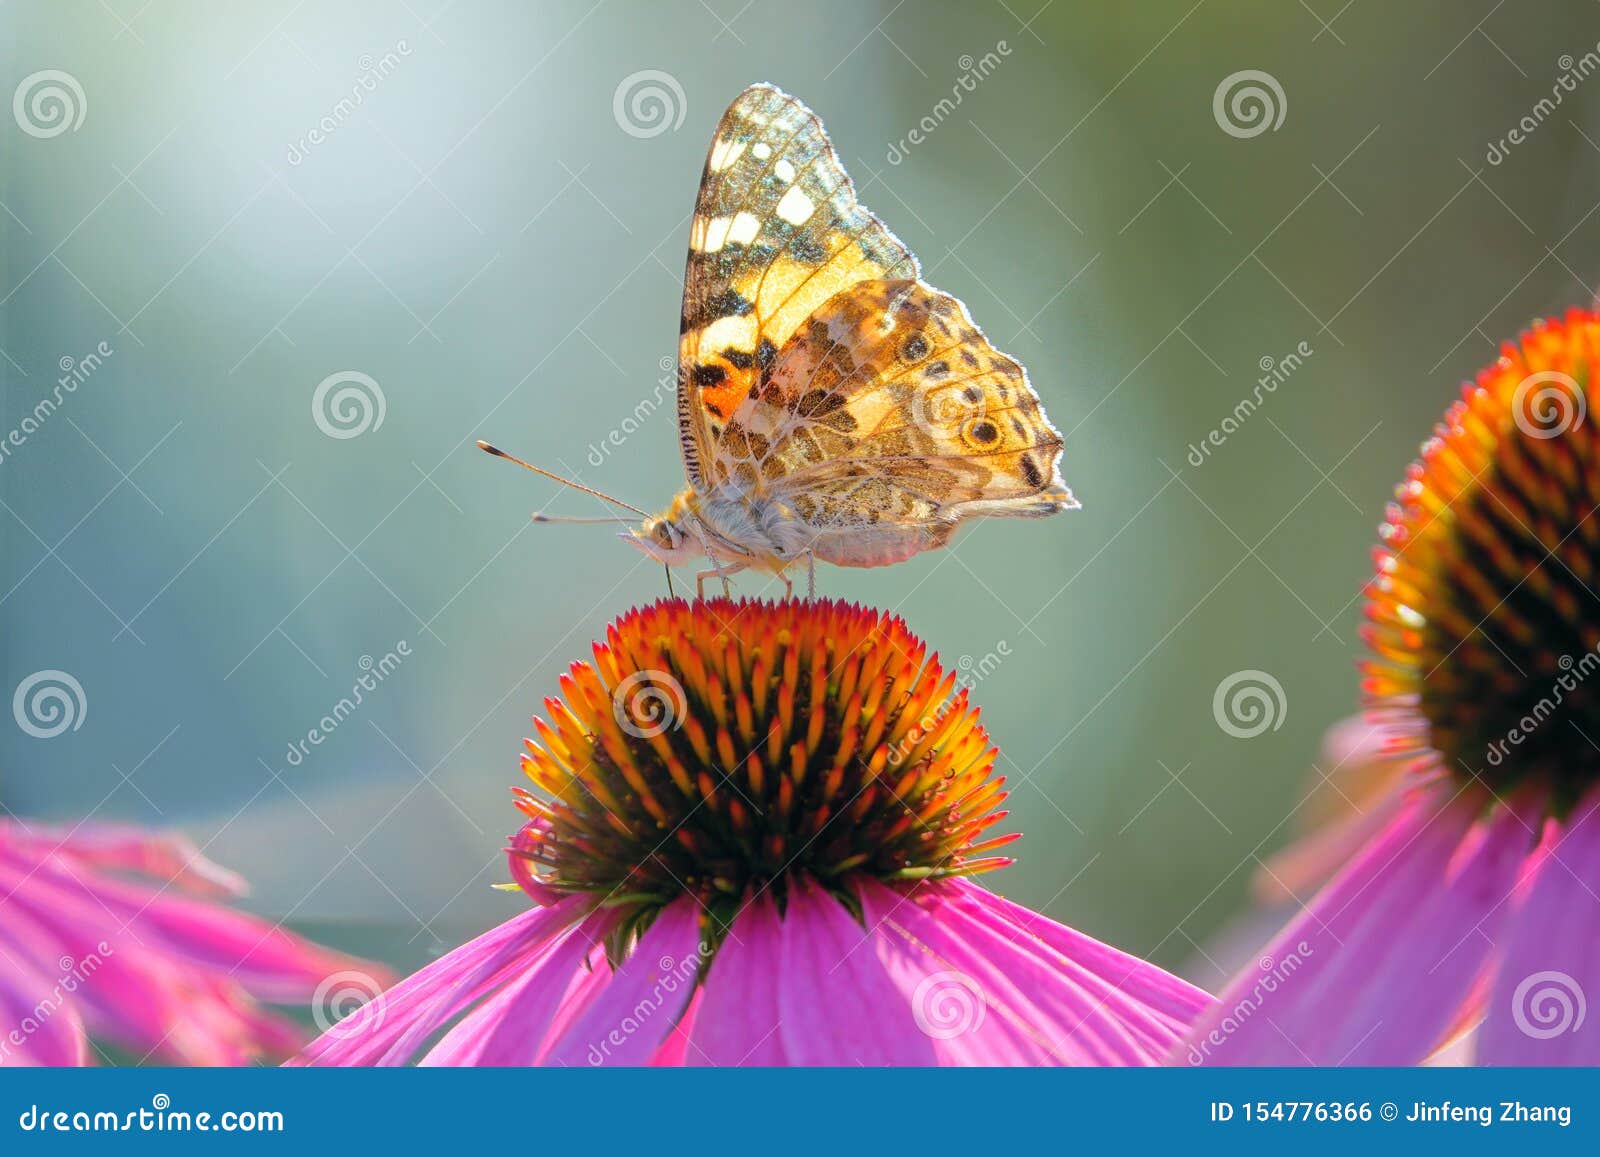 nymphalidae butterfly on flower